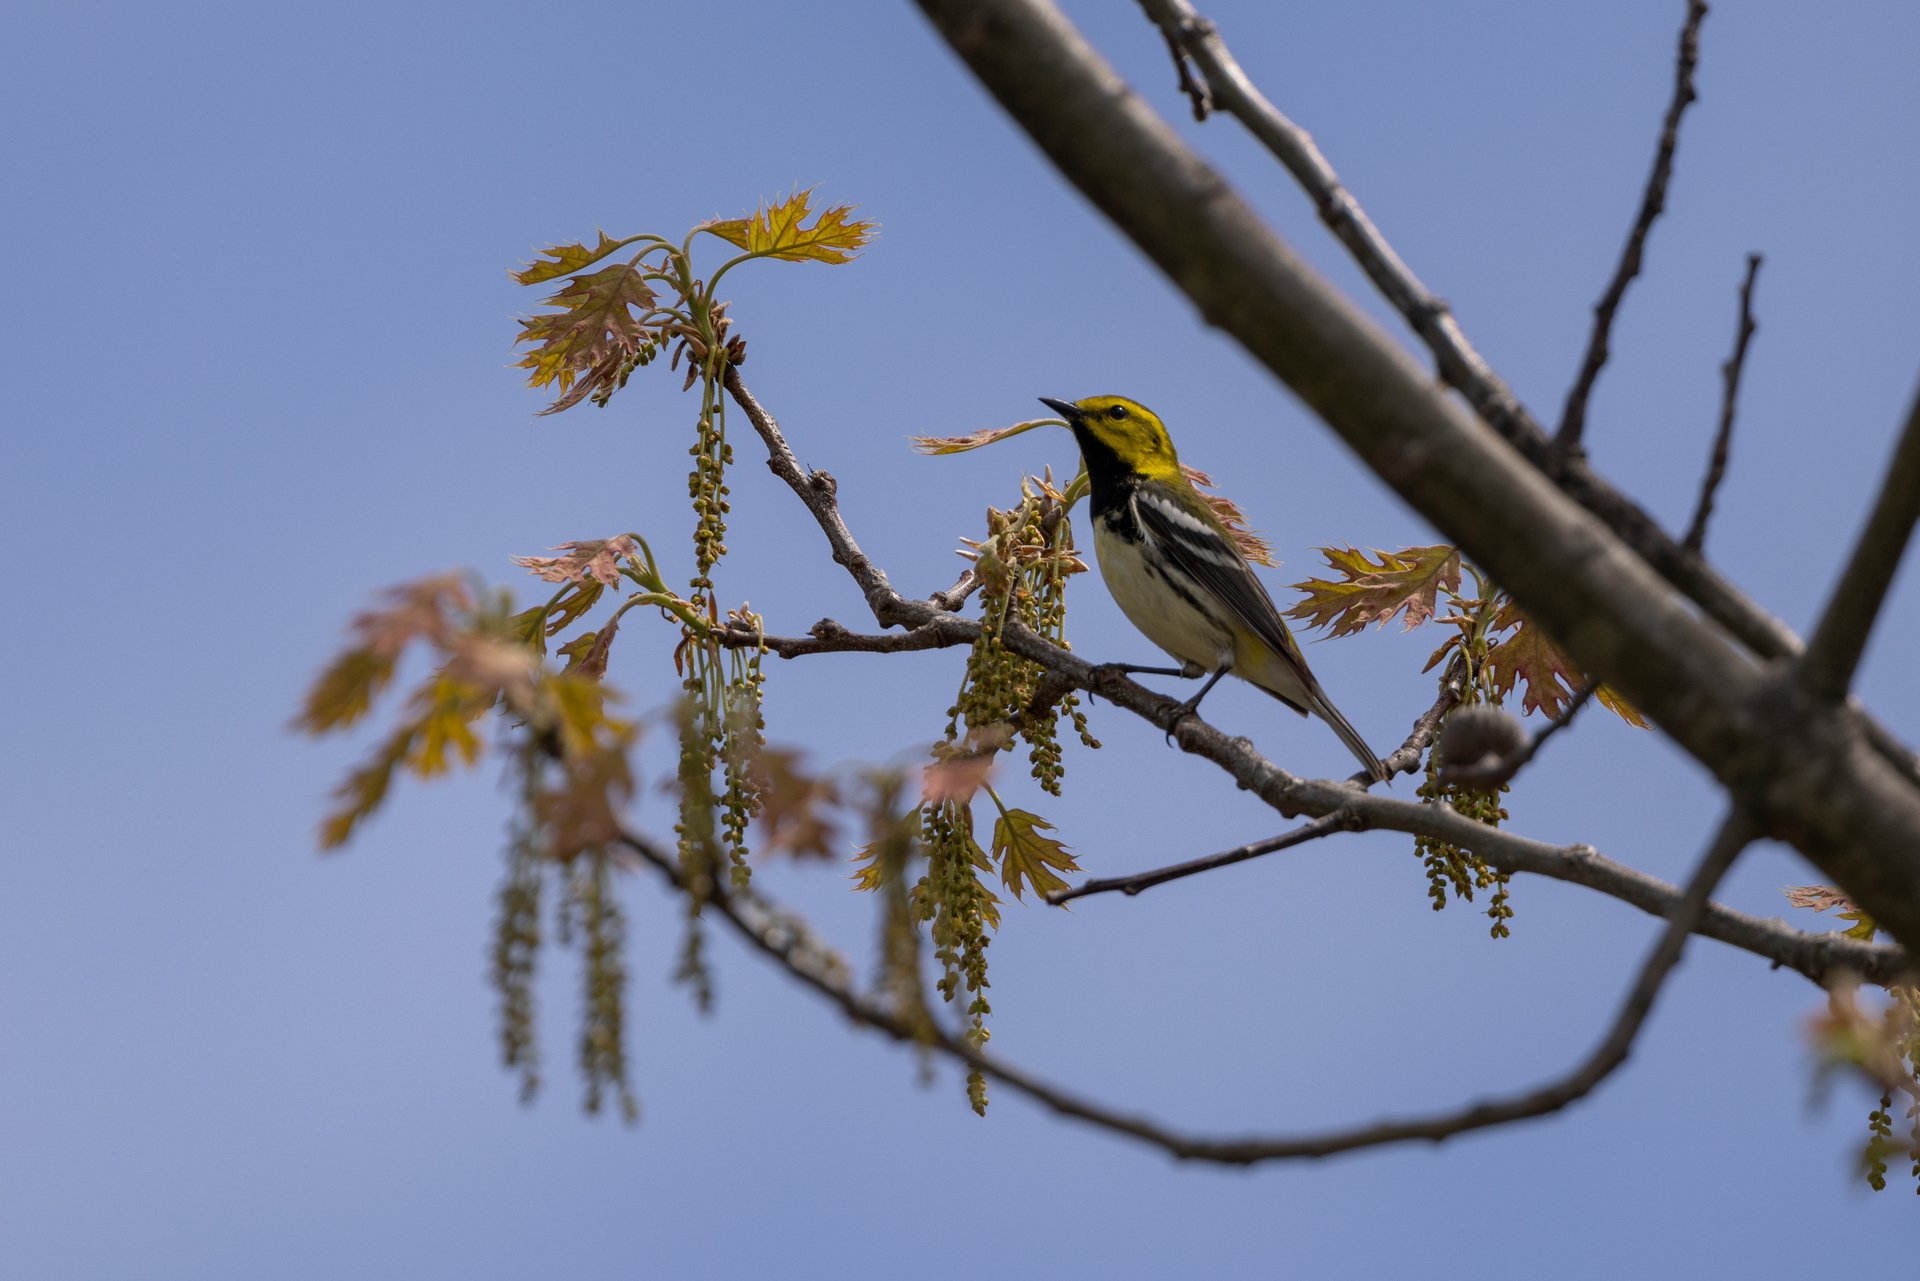 Yellow and black warbler perched in tree branch